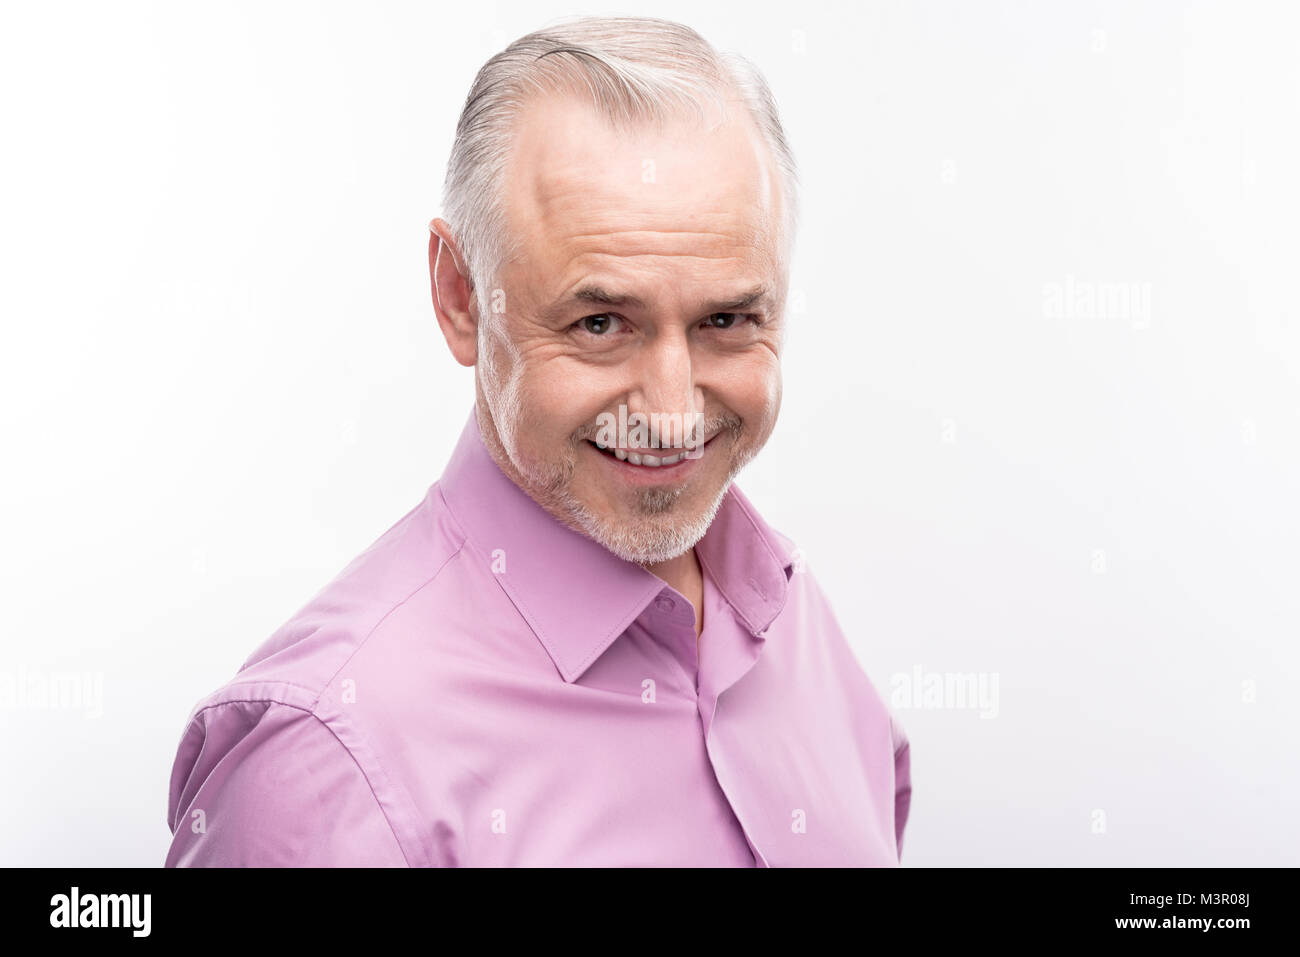 Handsome grey-haired man smiling cheekily while posing Stock Photo